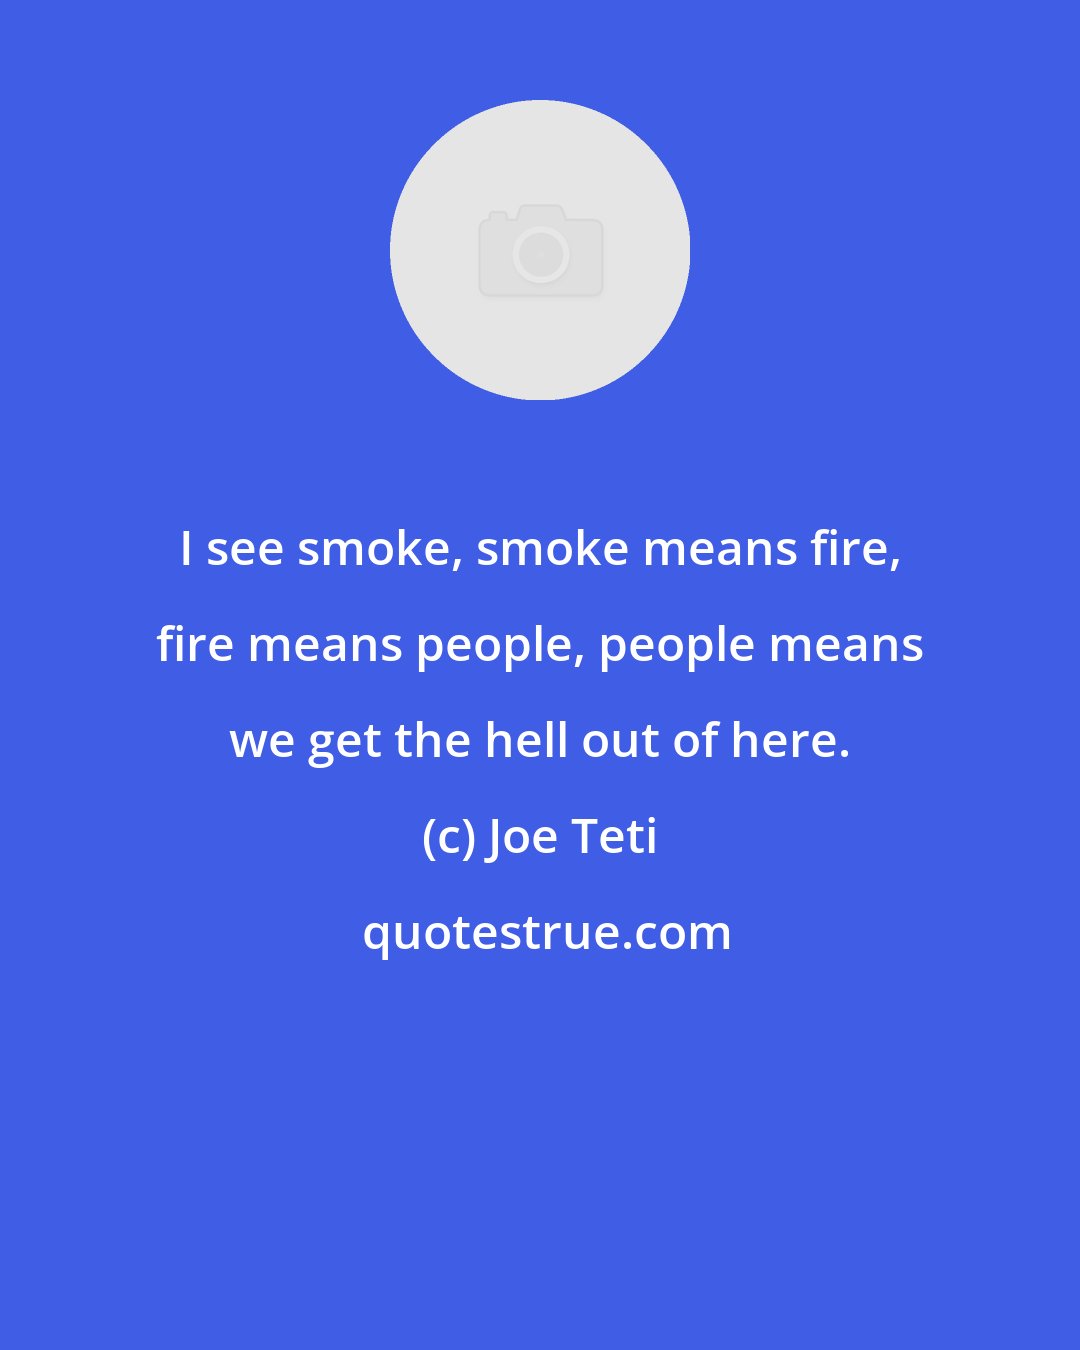 Joe Teti: I see smoke, smoke means fire, fire means people, people means we get the hell out of here.